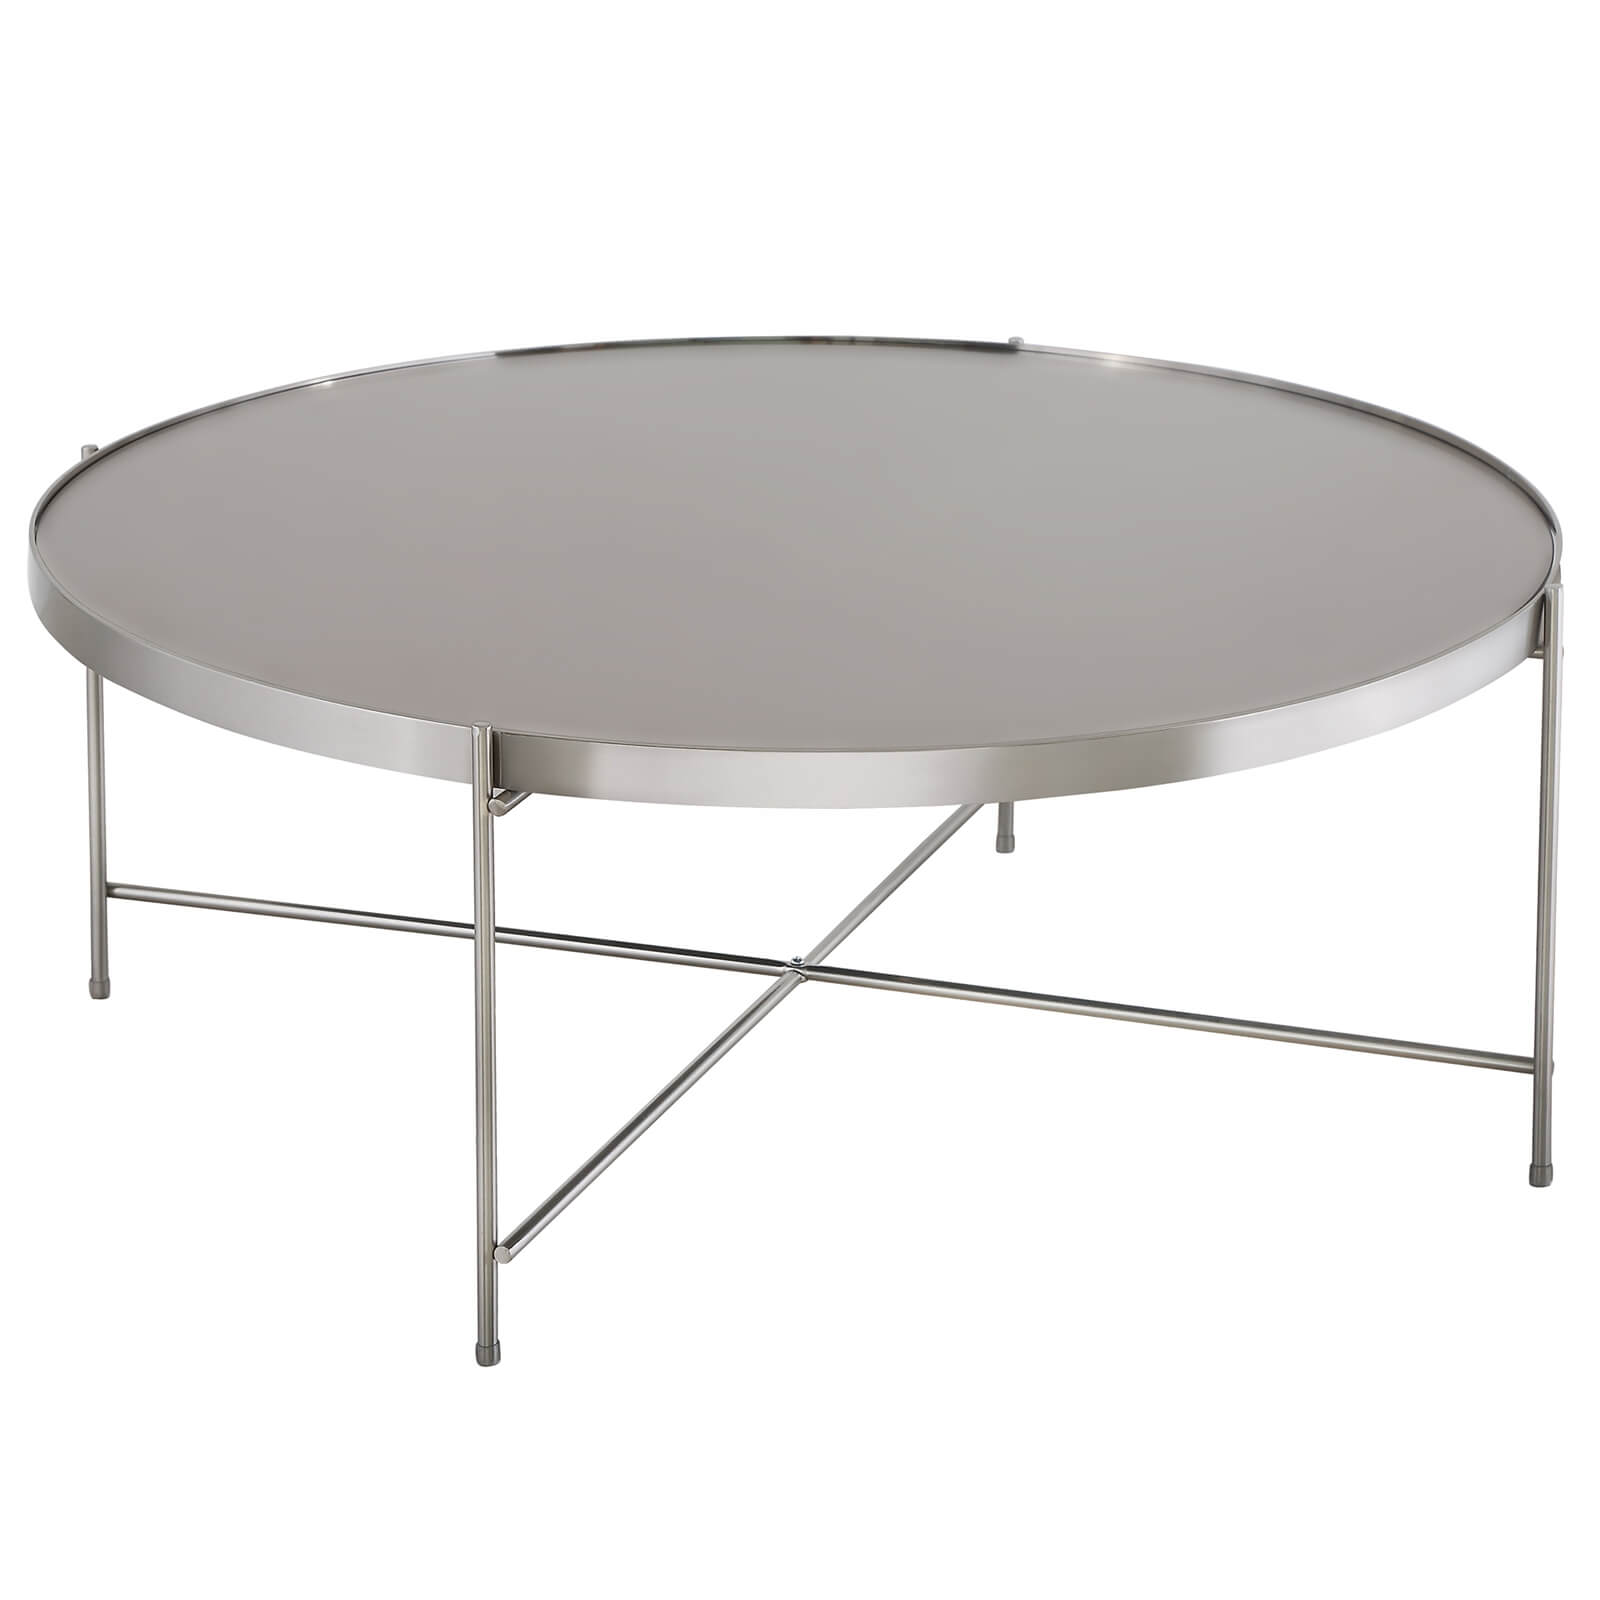 Oakland Coffee Table - Brushed Nickel